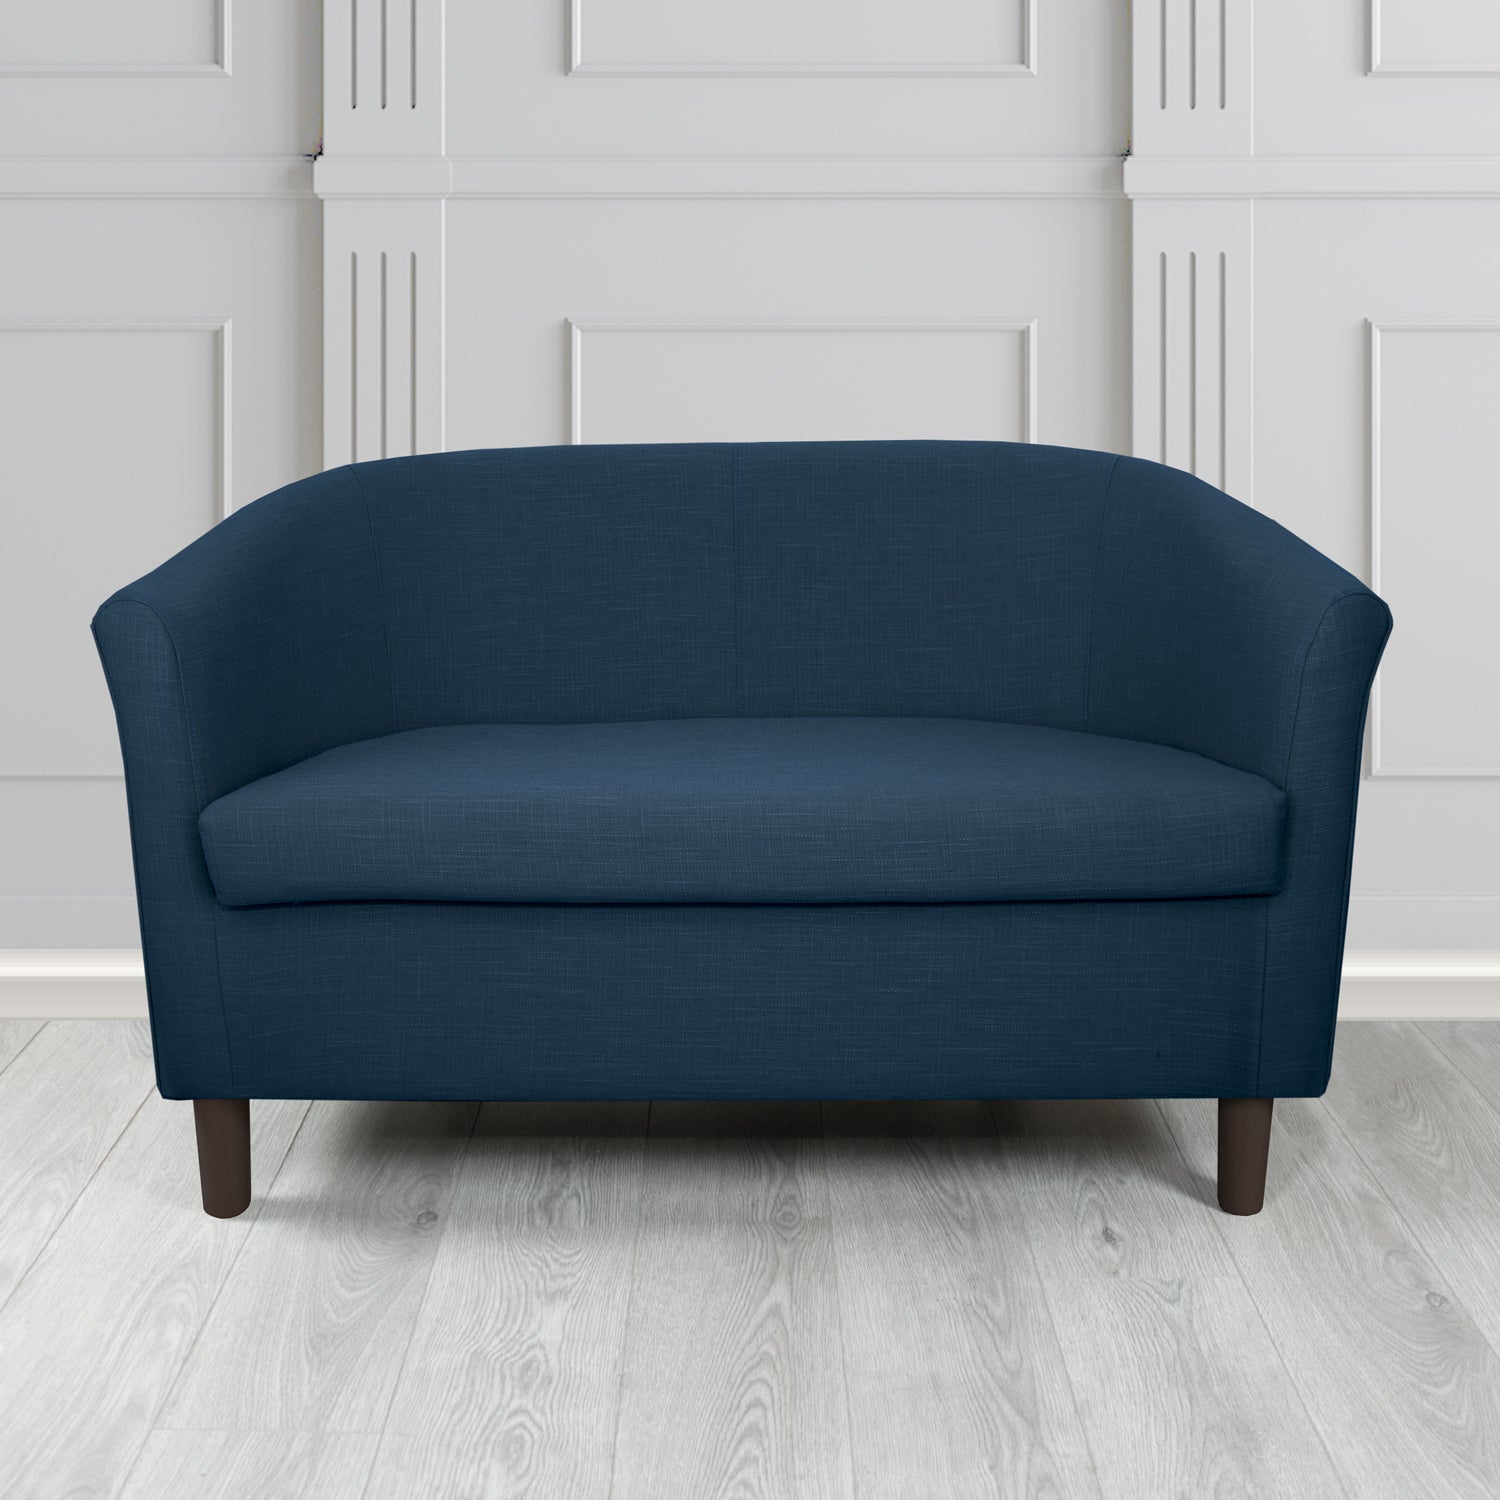 Tuscany 2 Seater Tub Sofa in Emporio Navy Linen Crib 5 Fabric - The Tub Chair Shop